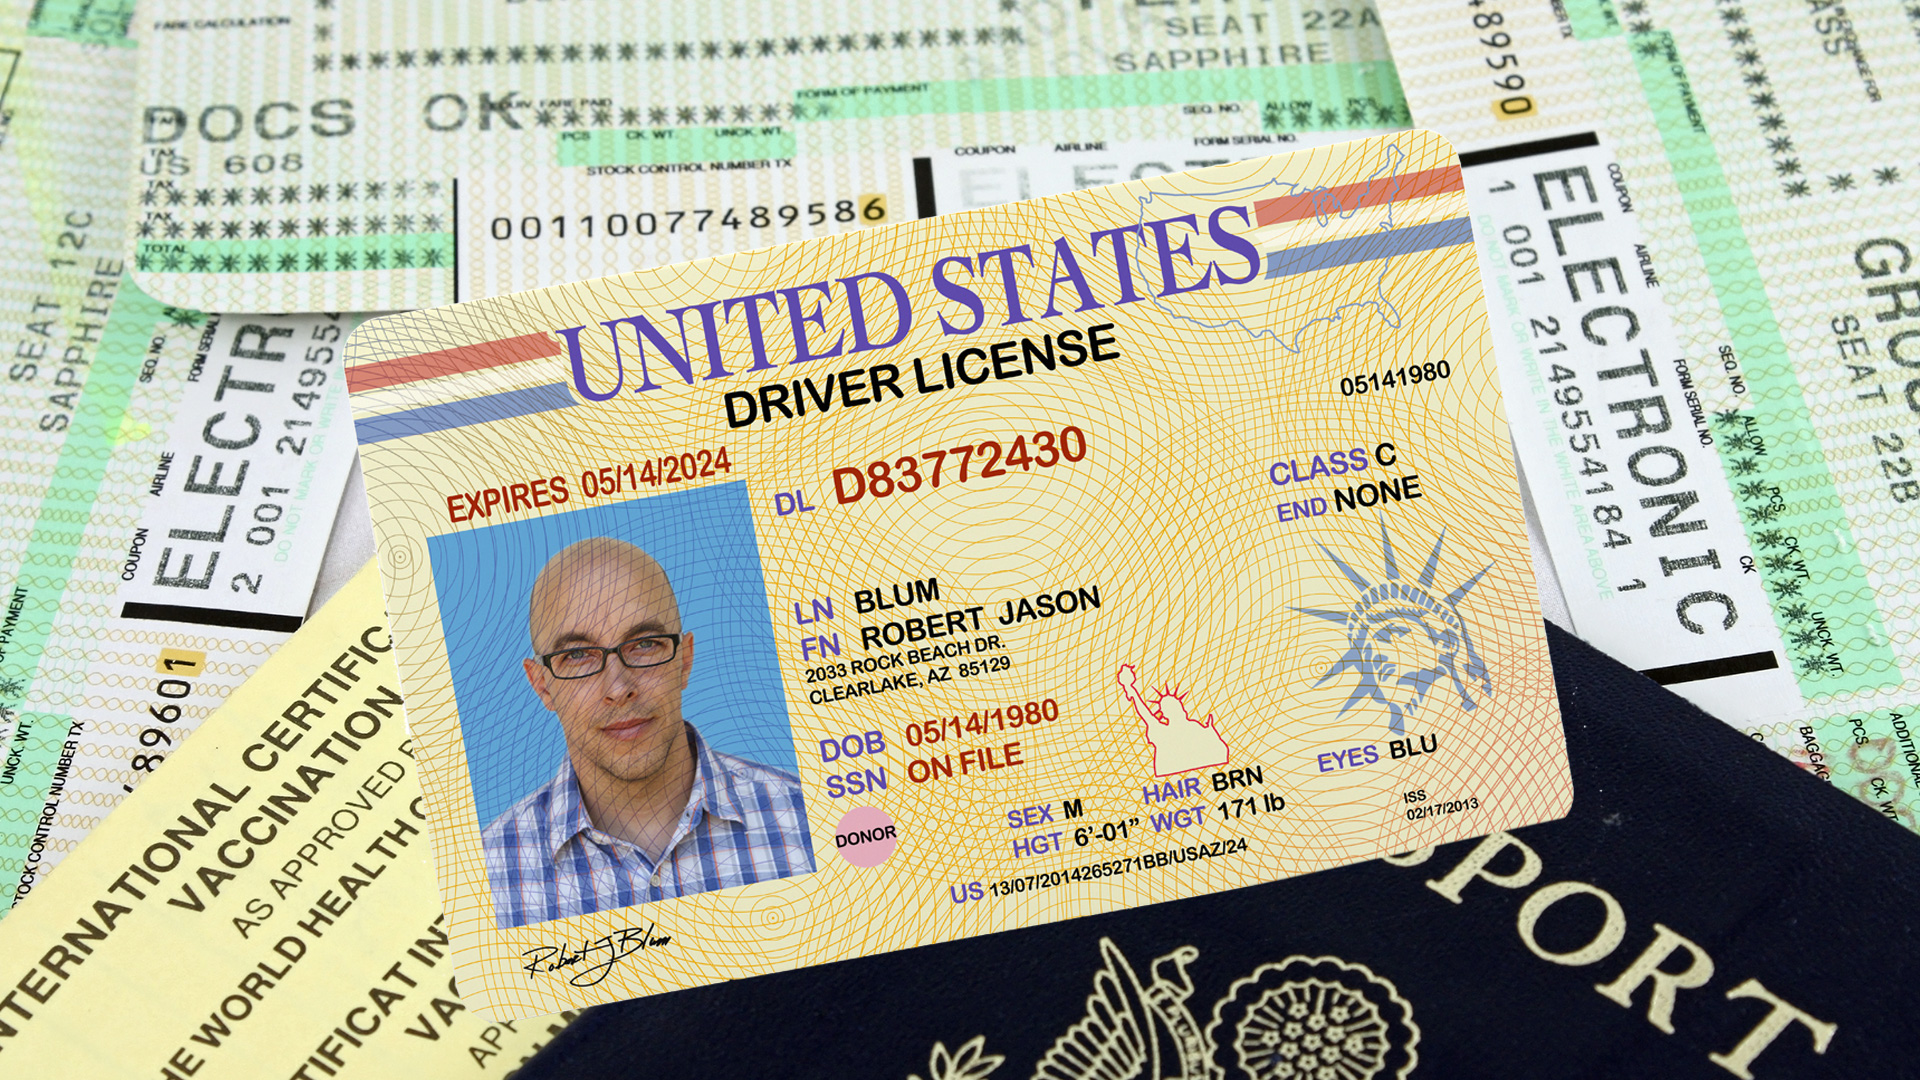 license to travel domestically